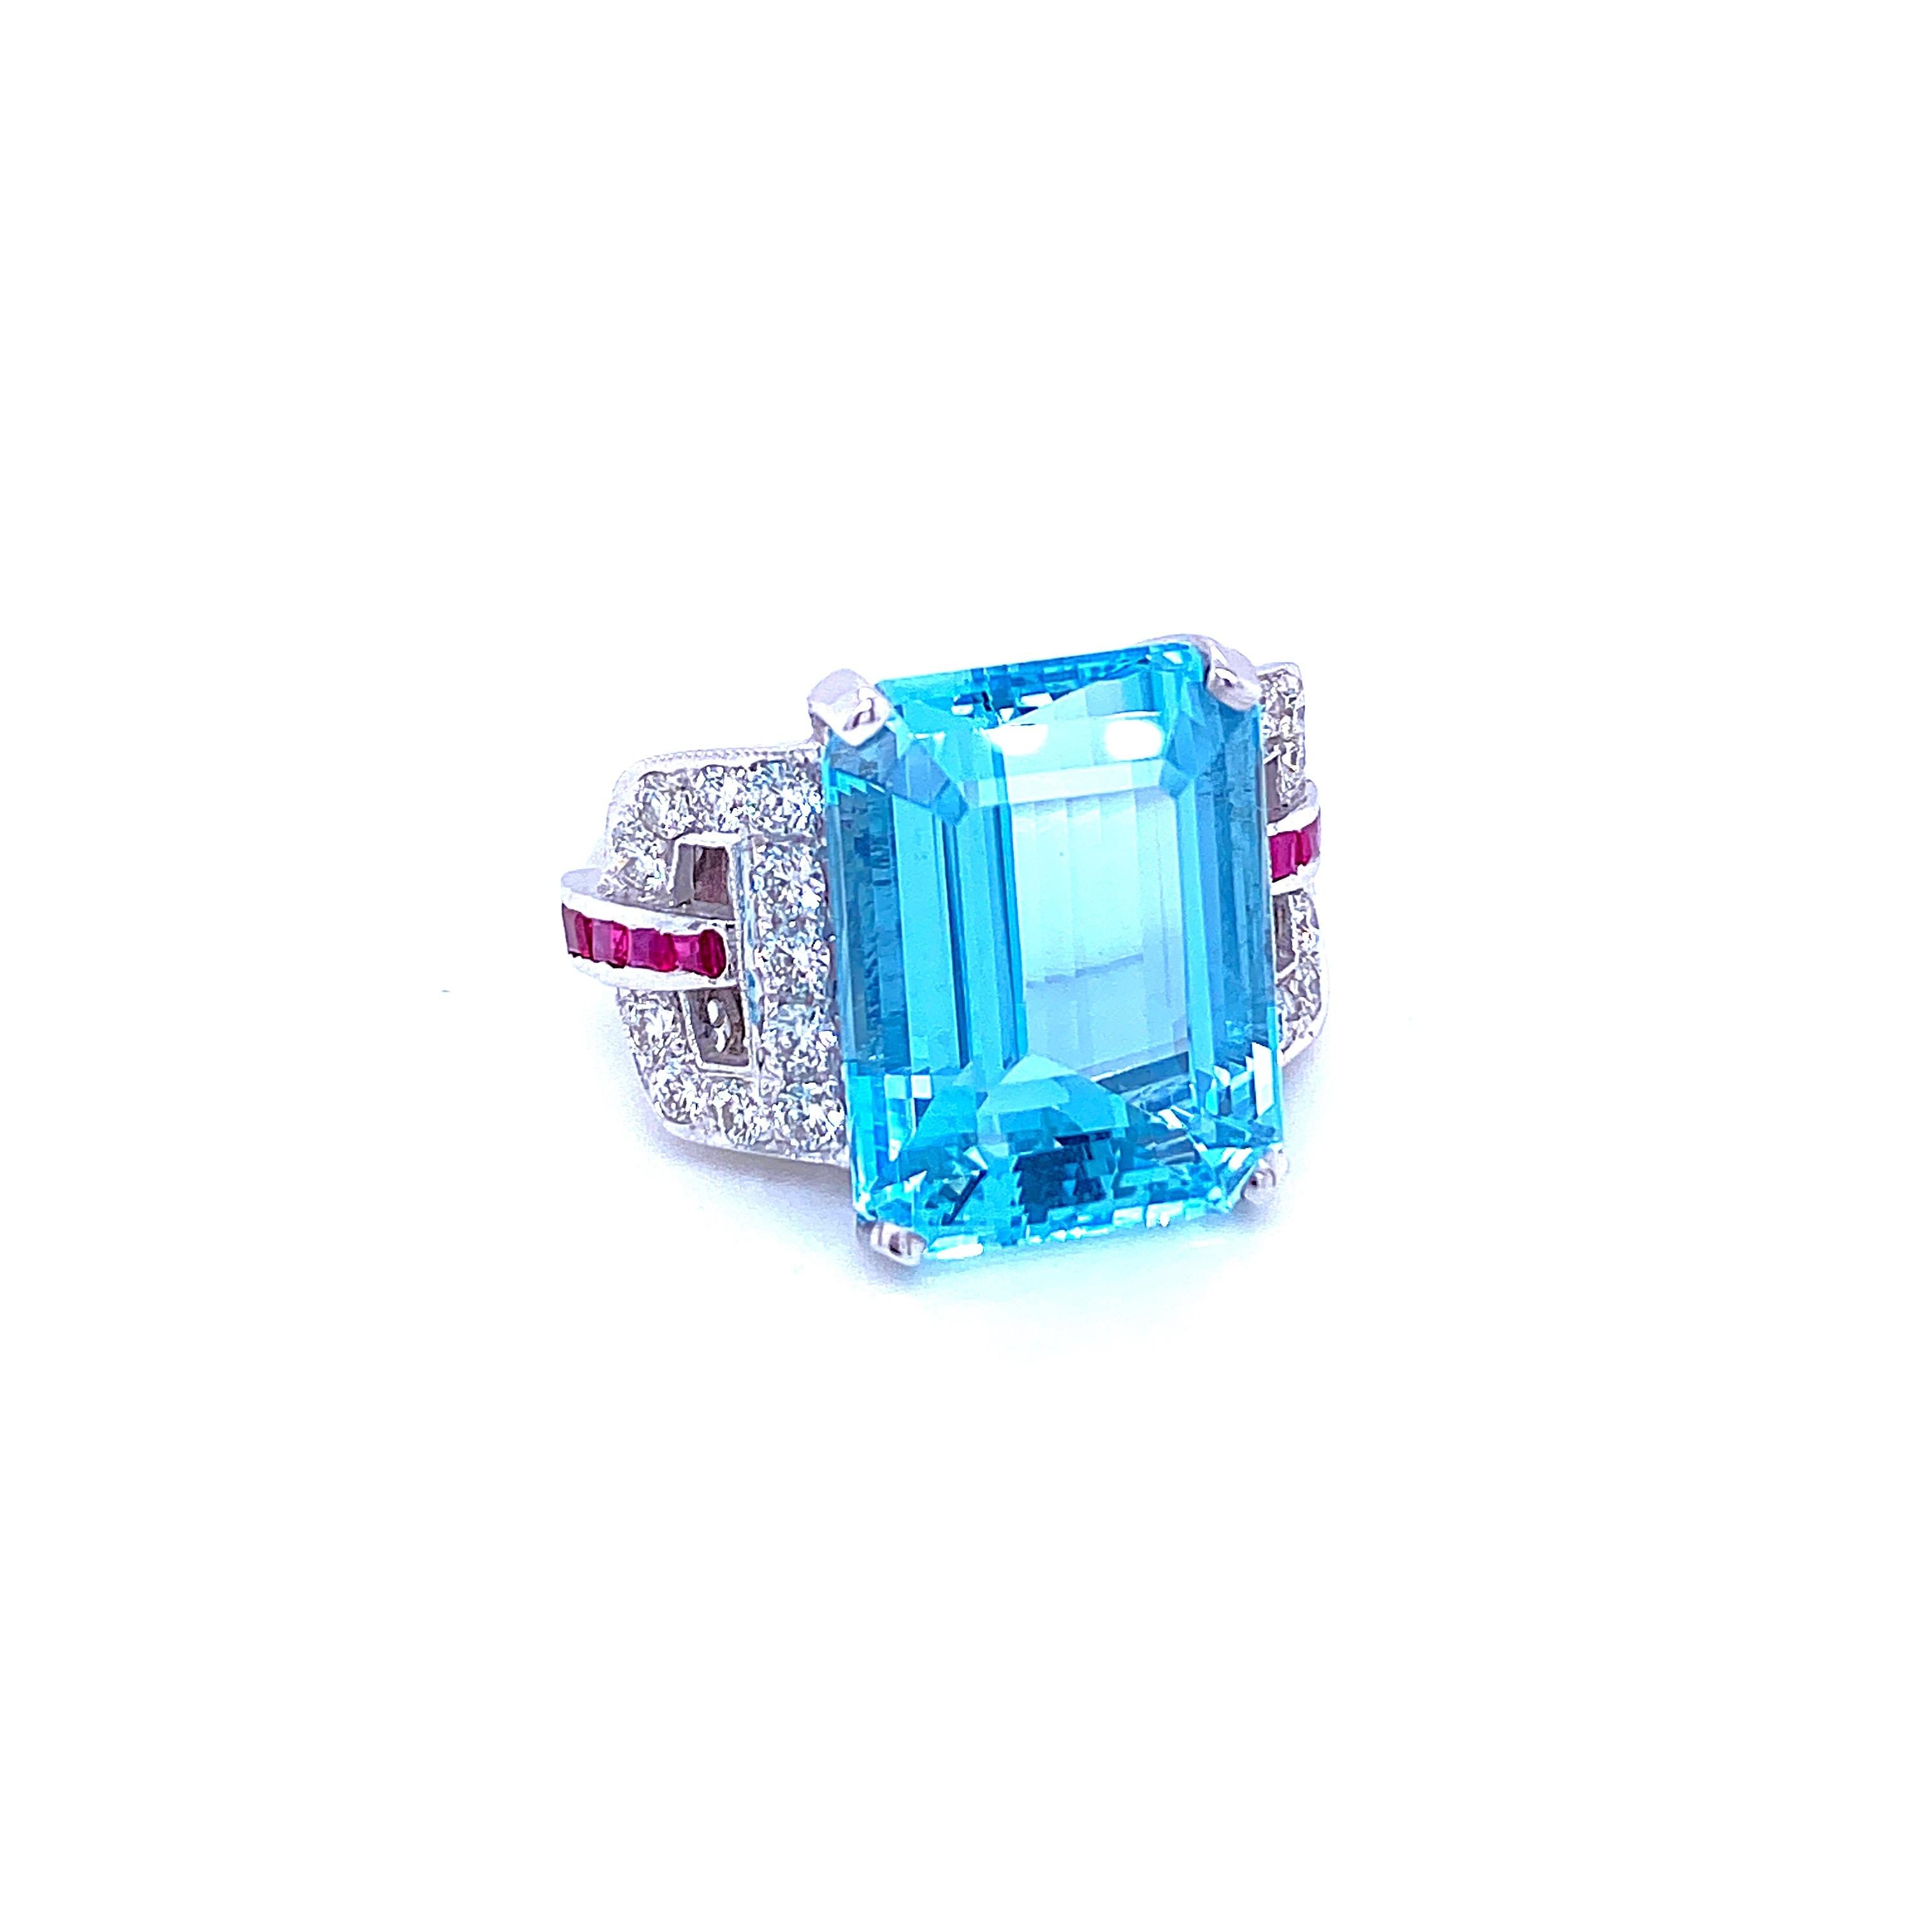 Art Deco style ring set in the center with a stunning Aquamarine weighing 15,74 carats graded AAAA, and surrounded by approx. 0.40 carat of custom cut Rubies and 0.90 ct of round brilliant cut diamonds graded G Color Vvs Clarity, Remarkable